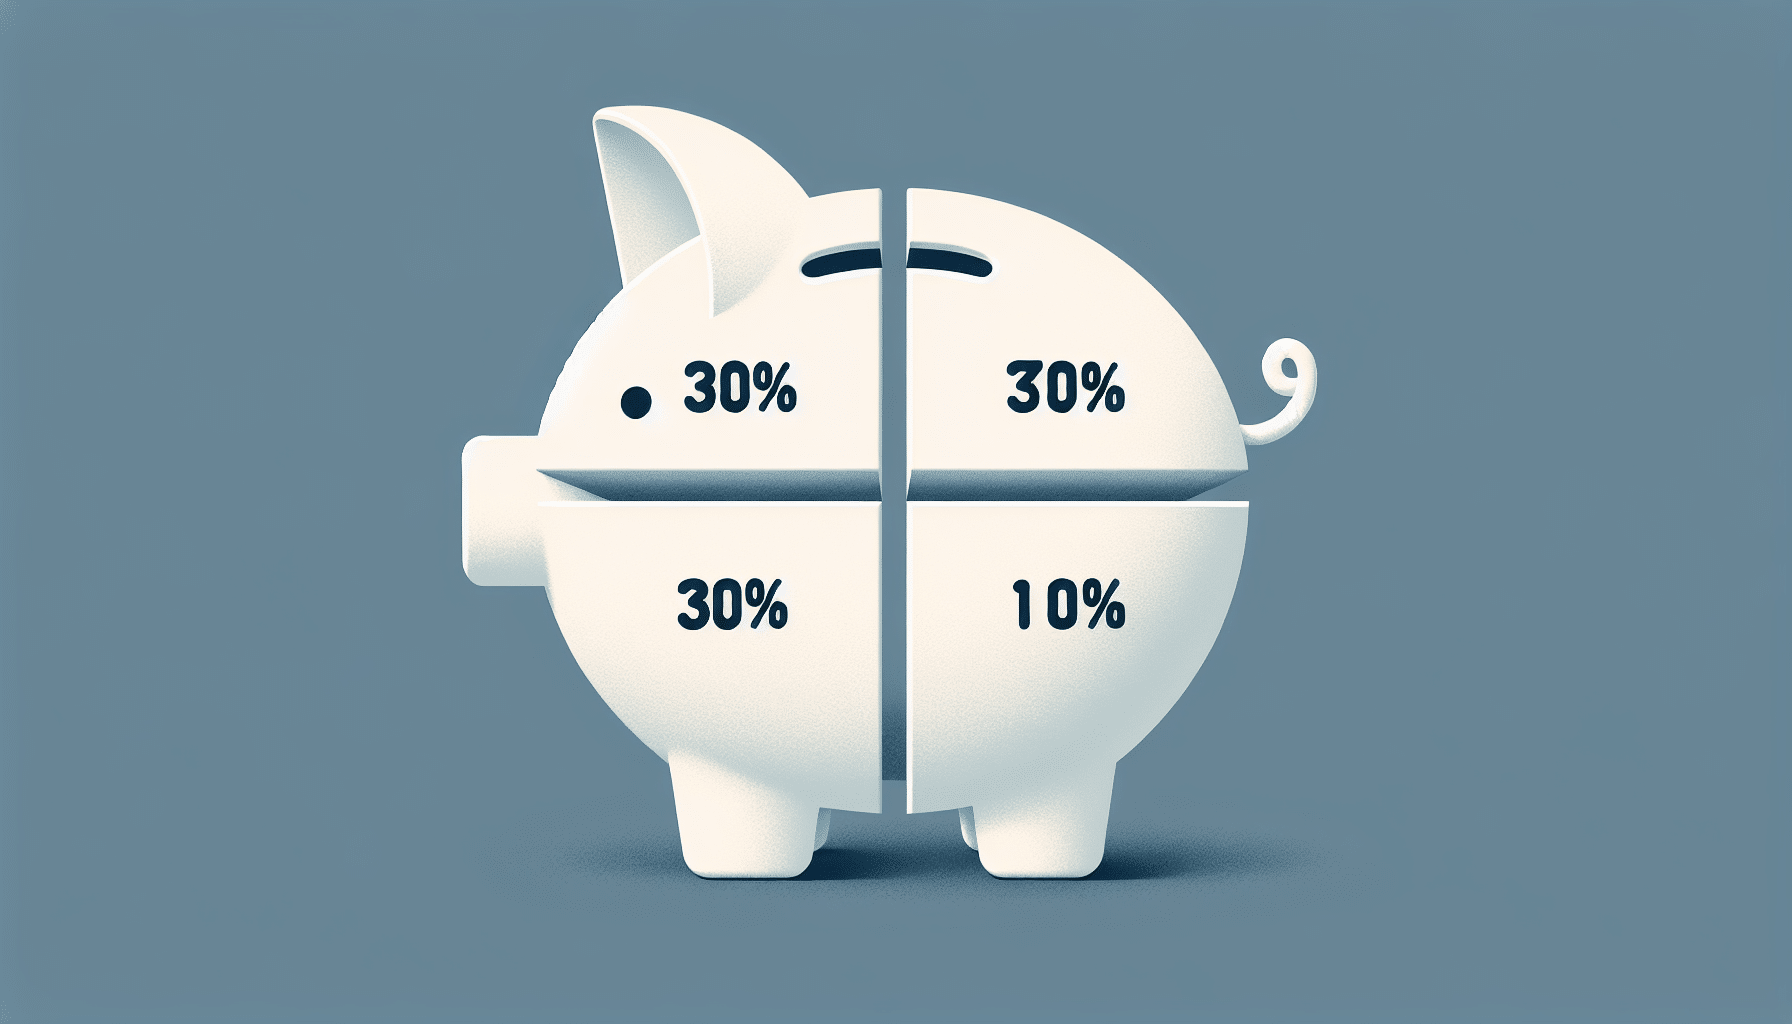 The 30-30-30-10 budget: A Percentage-Based Budgeting Method